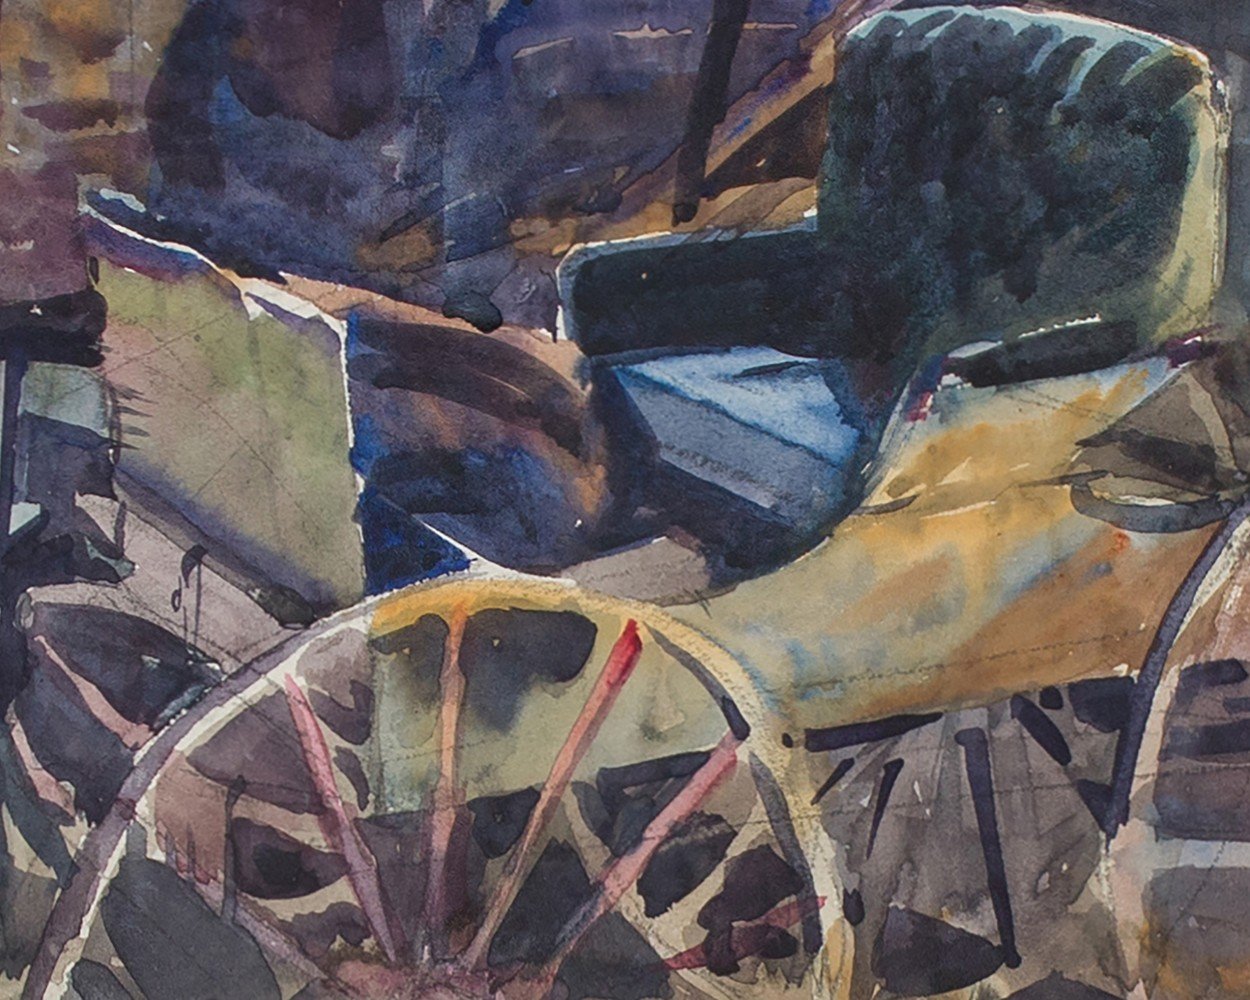 Buggy in Shed, Berlin Heights, Ohio by Frank Nelson Wilcox